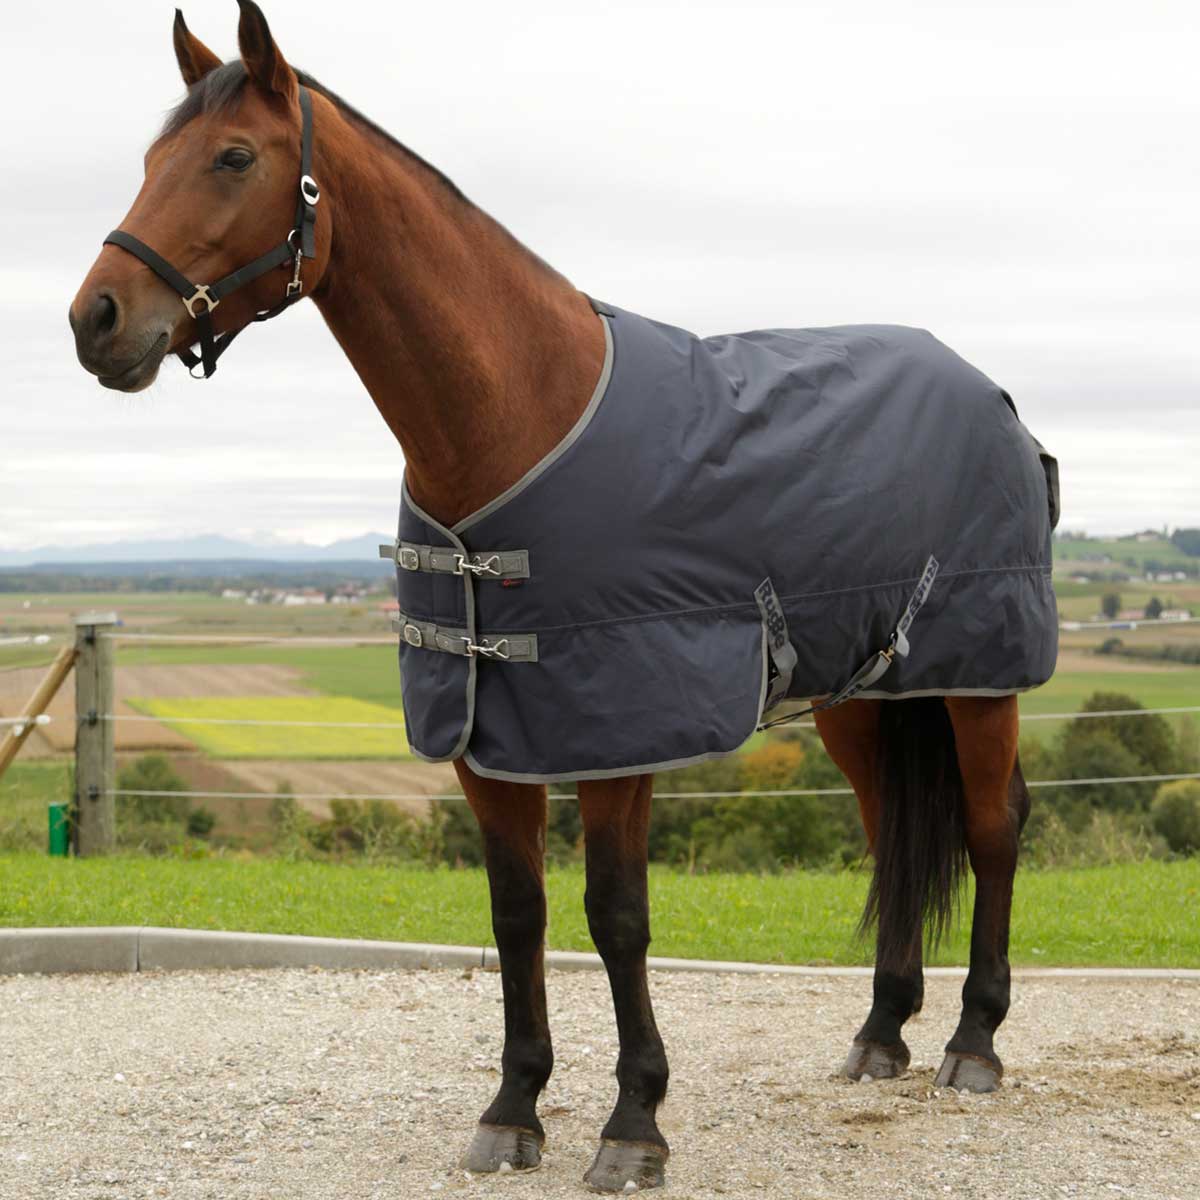 Covalliero Winter Blanket RugBe IceProtect navy 600D, 300g